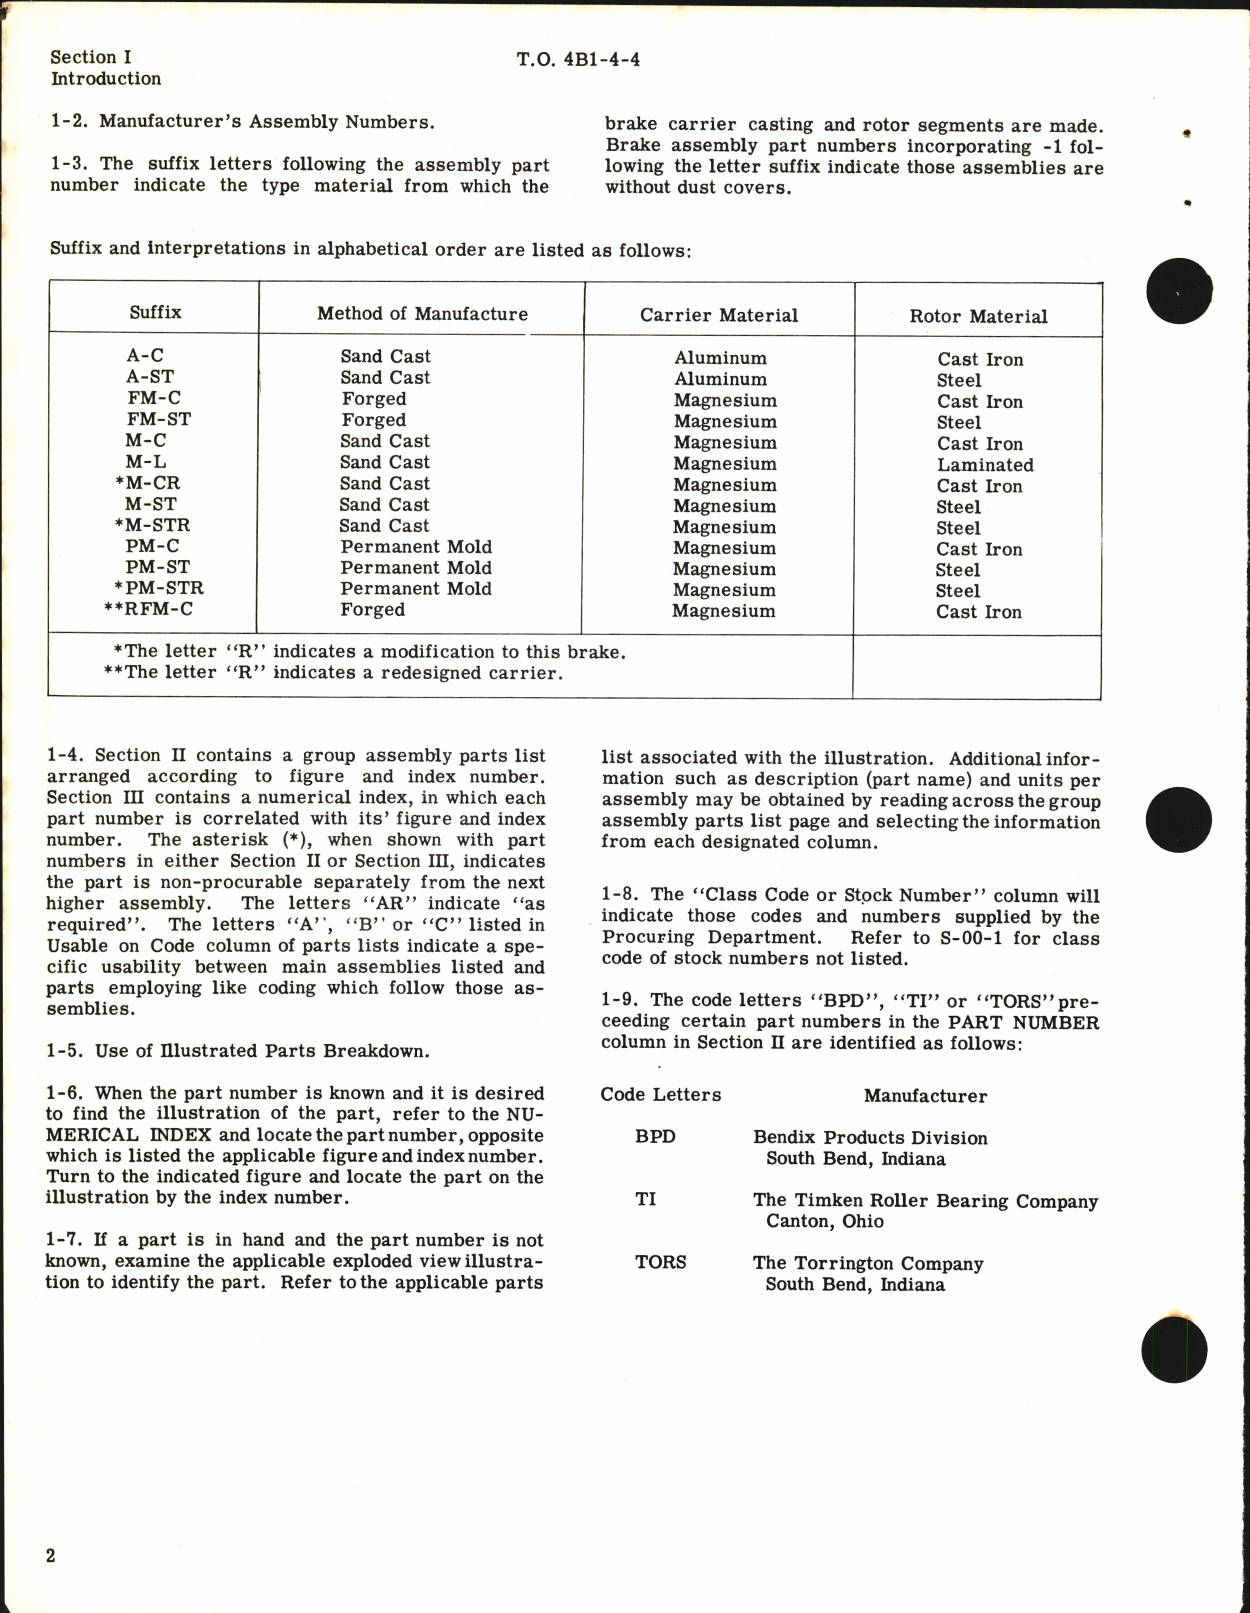 Sample page 6 from AirCorps Library document: Illustrated Parts Breakdown for Hydraulic Brakes Segmented Rotor Type